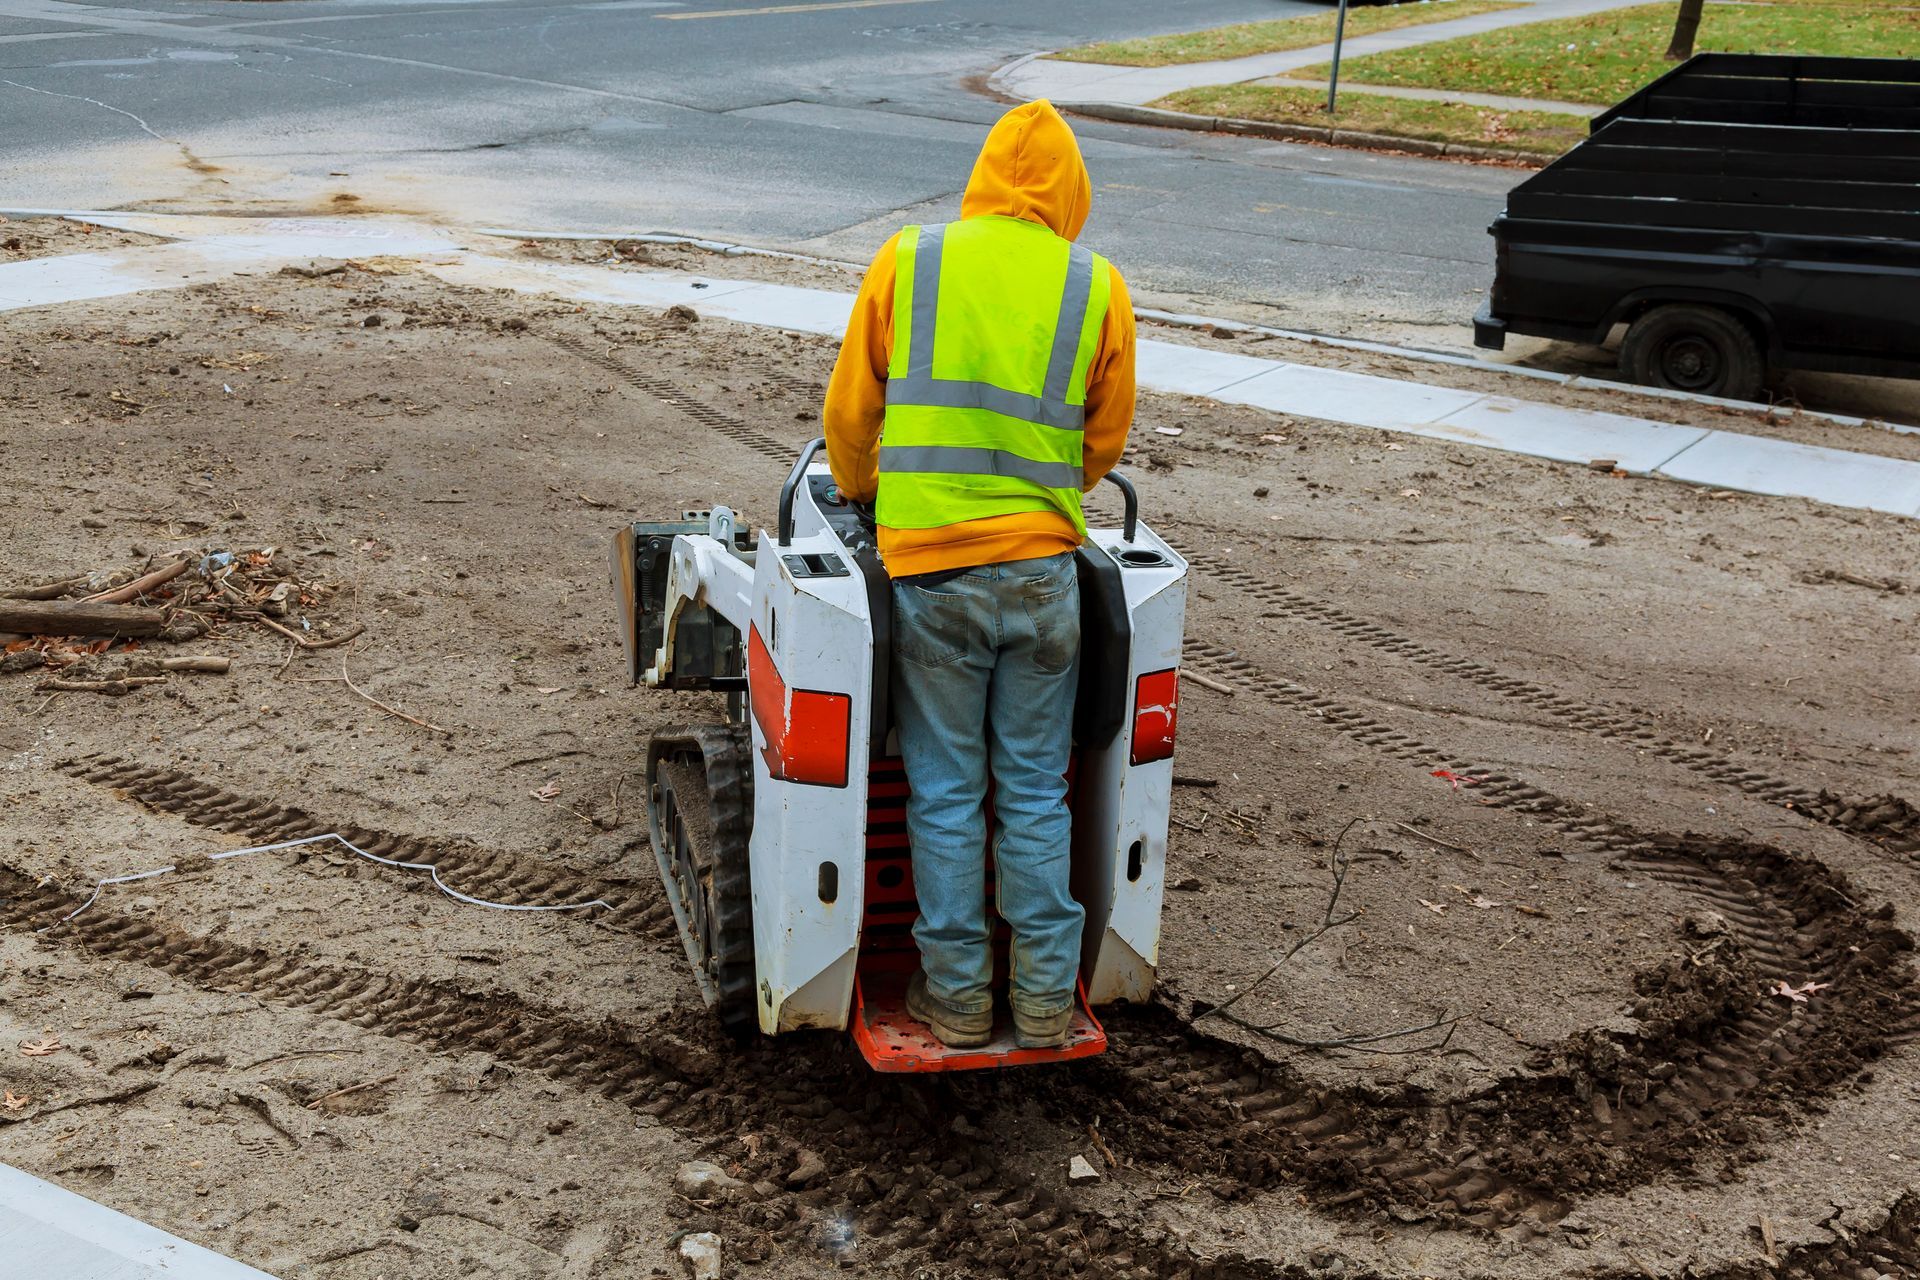 A small excavator works on the street